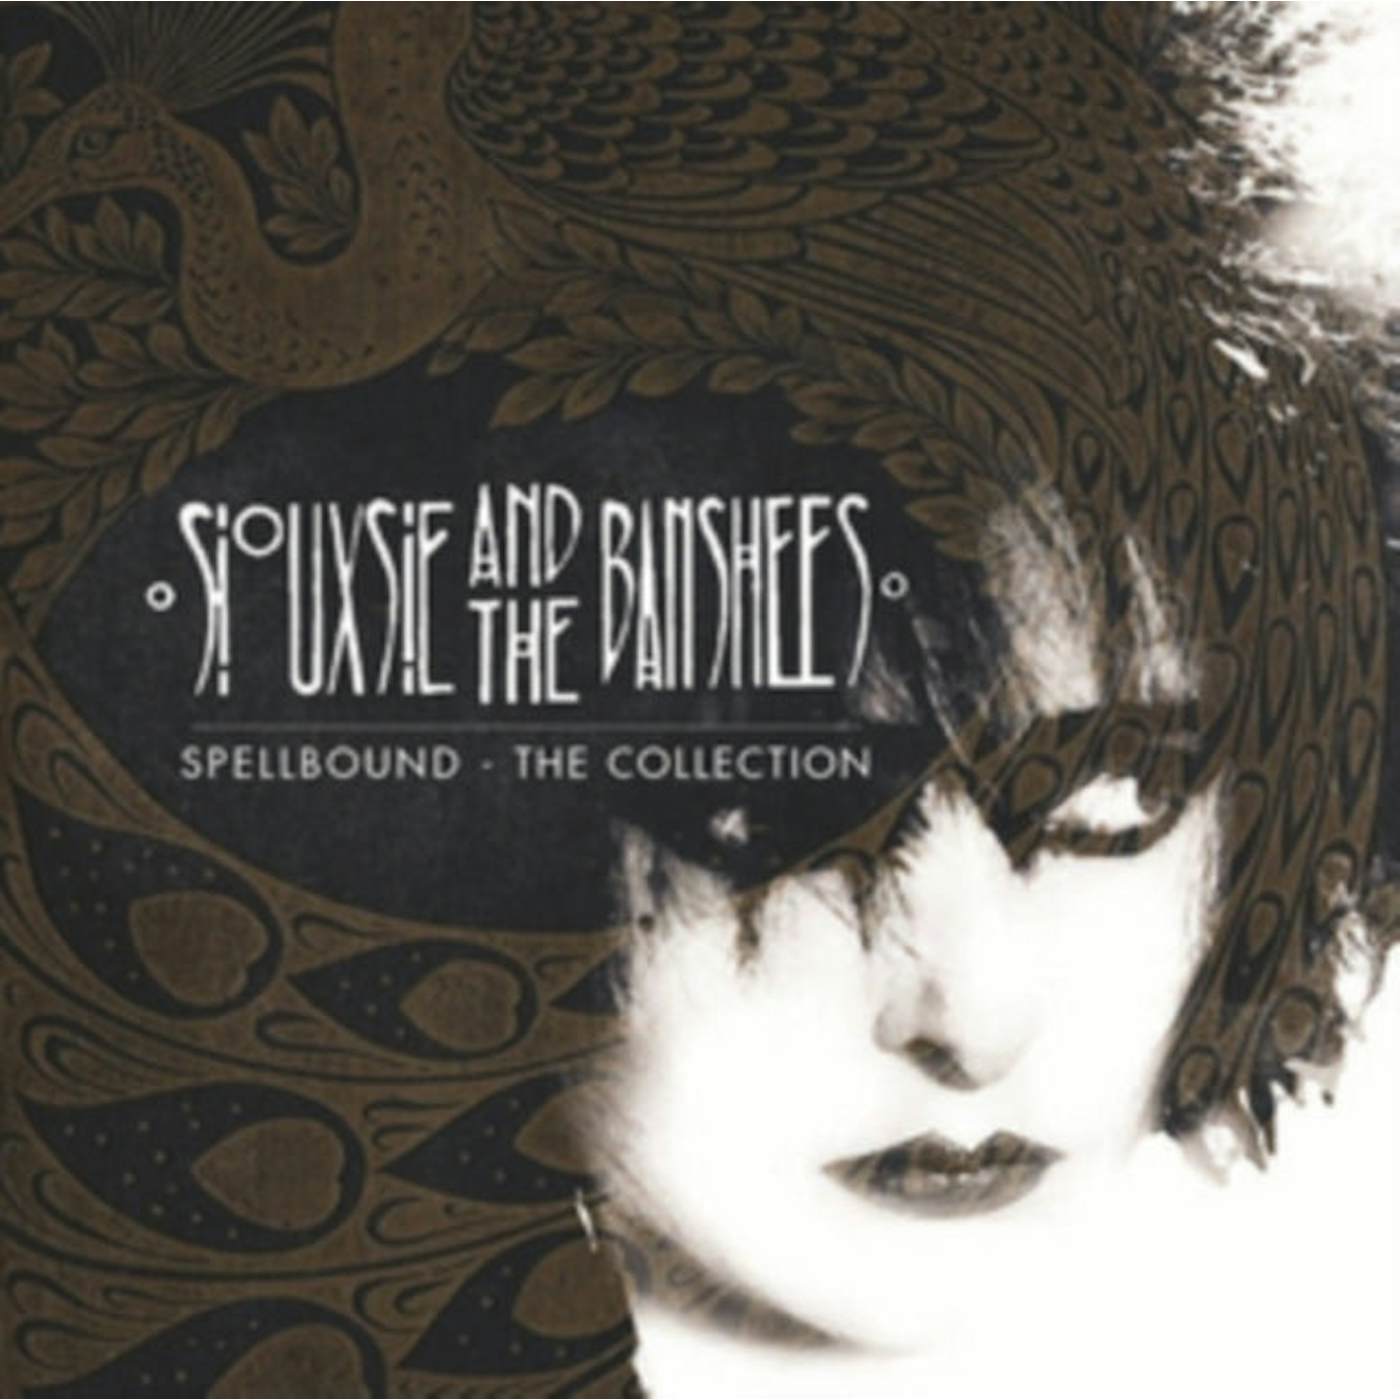 Siouxsie and the Banshees CD - Spellbound - The Collection